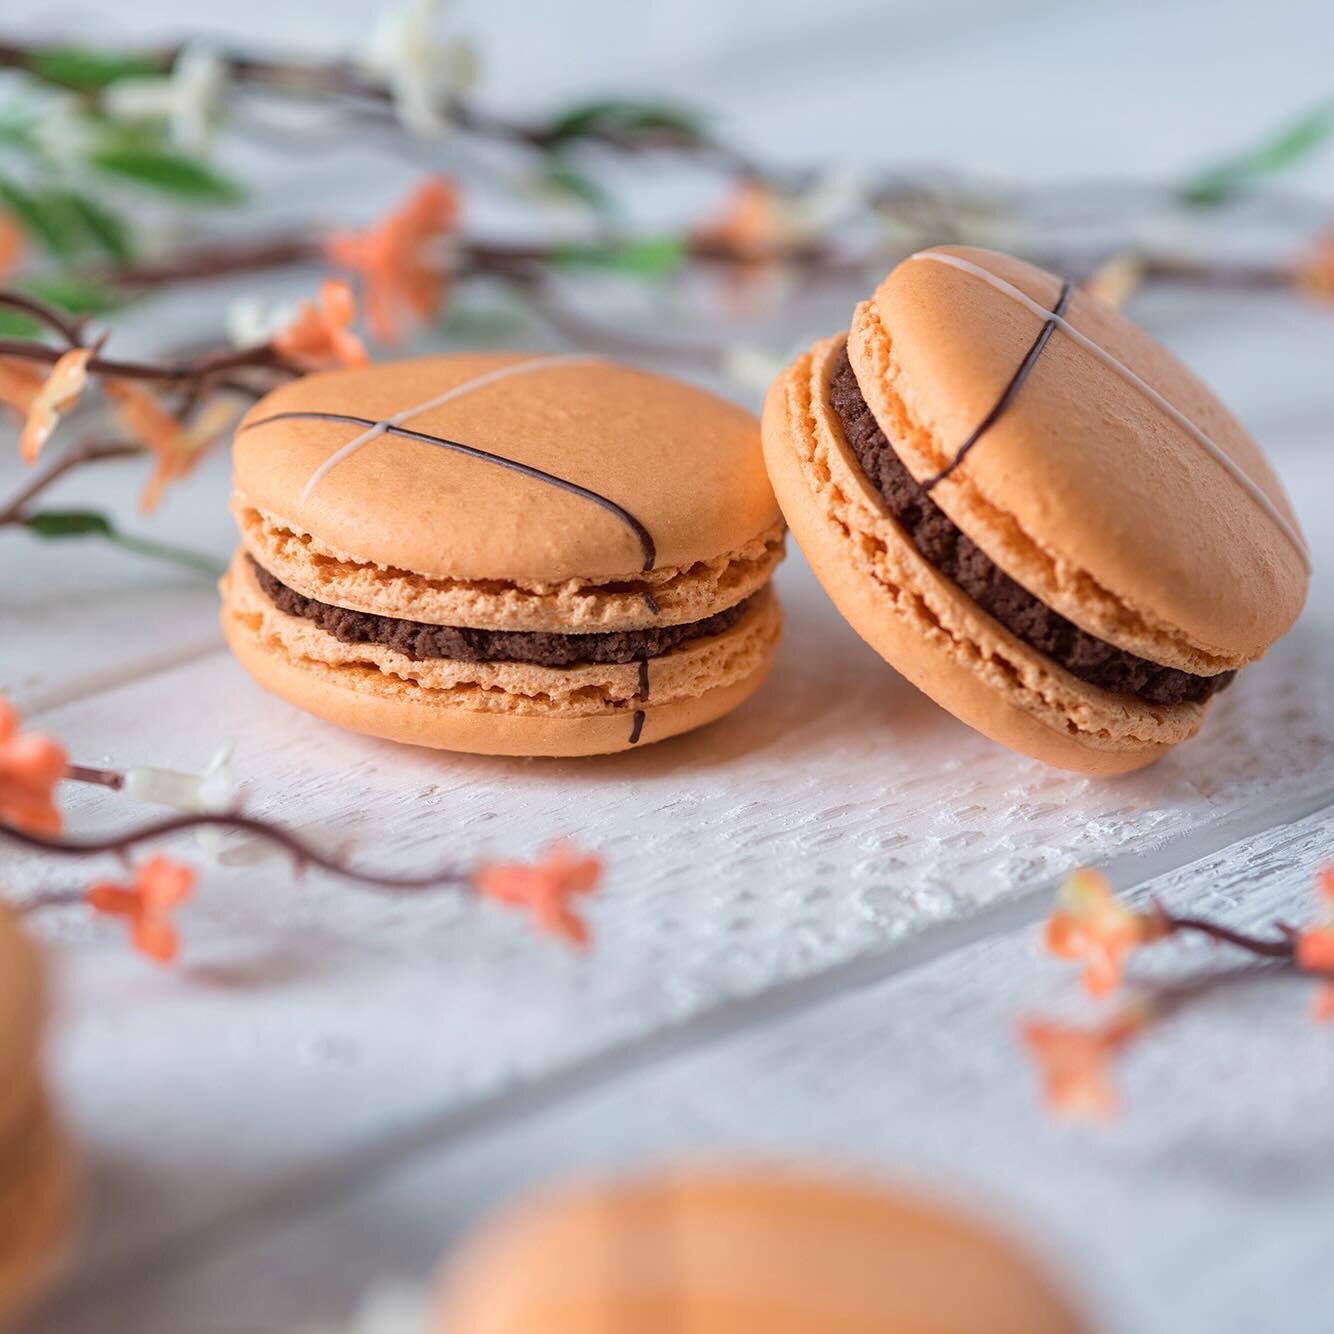 You know spring has arrived when our Chocolate Orange Blossom macaron makes its debut! Available now for a limited time.

#macaronbar #chocolateorangeblossom #macarons